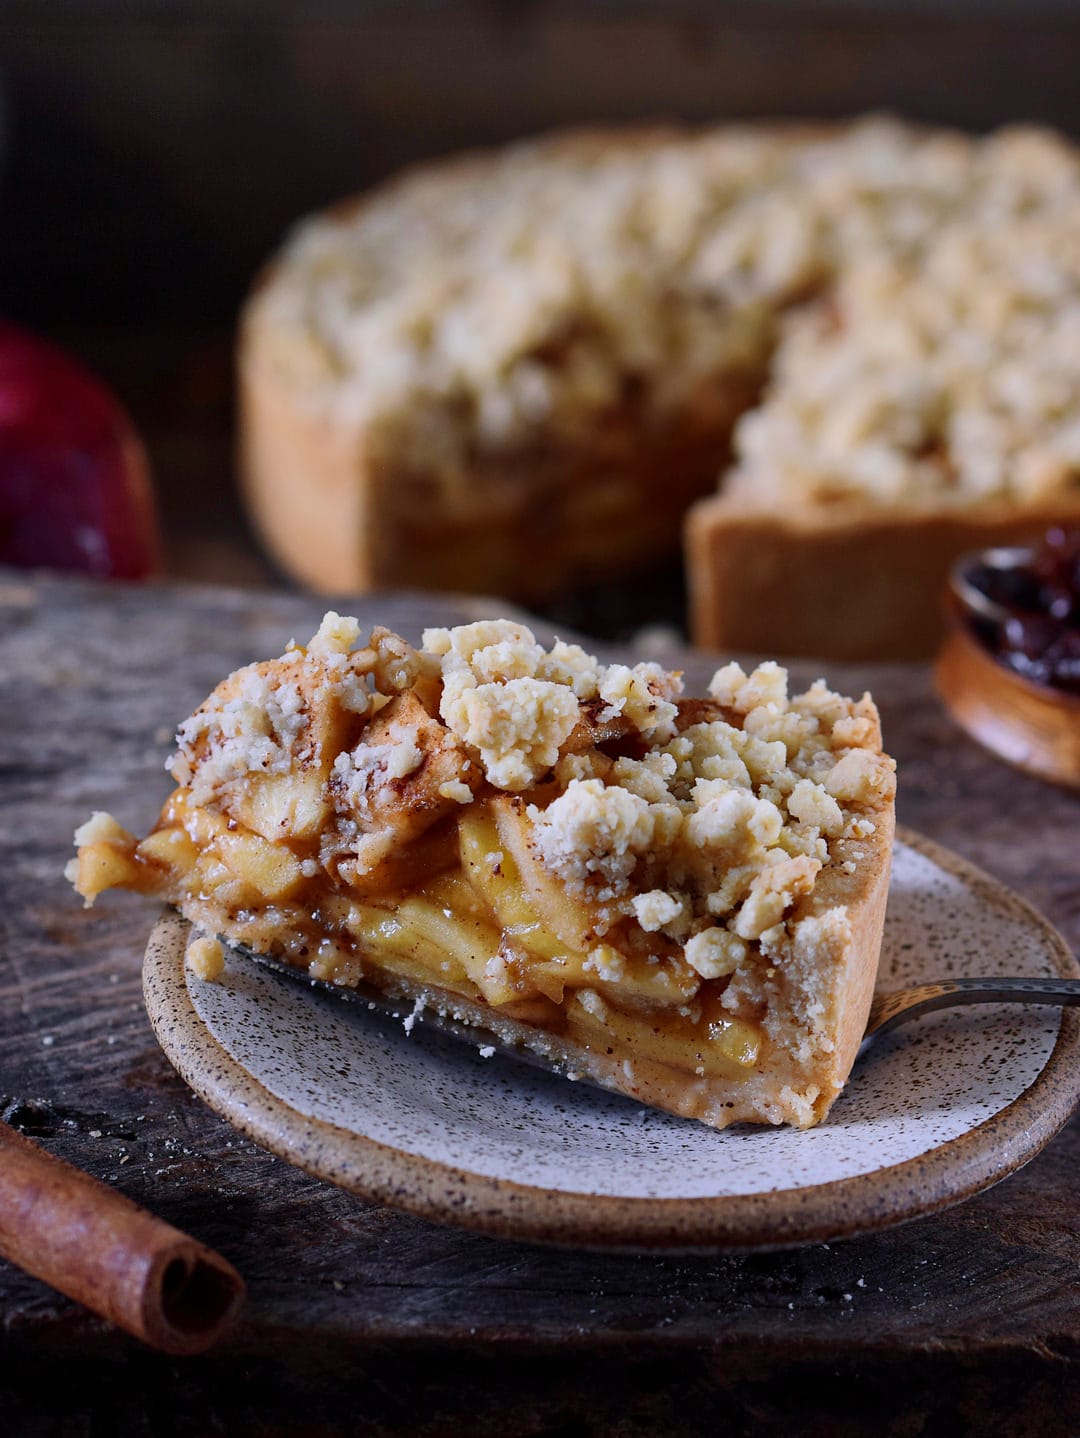 A piece of vegan apple pie with streusel and cinnamon